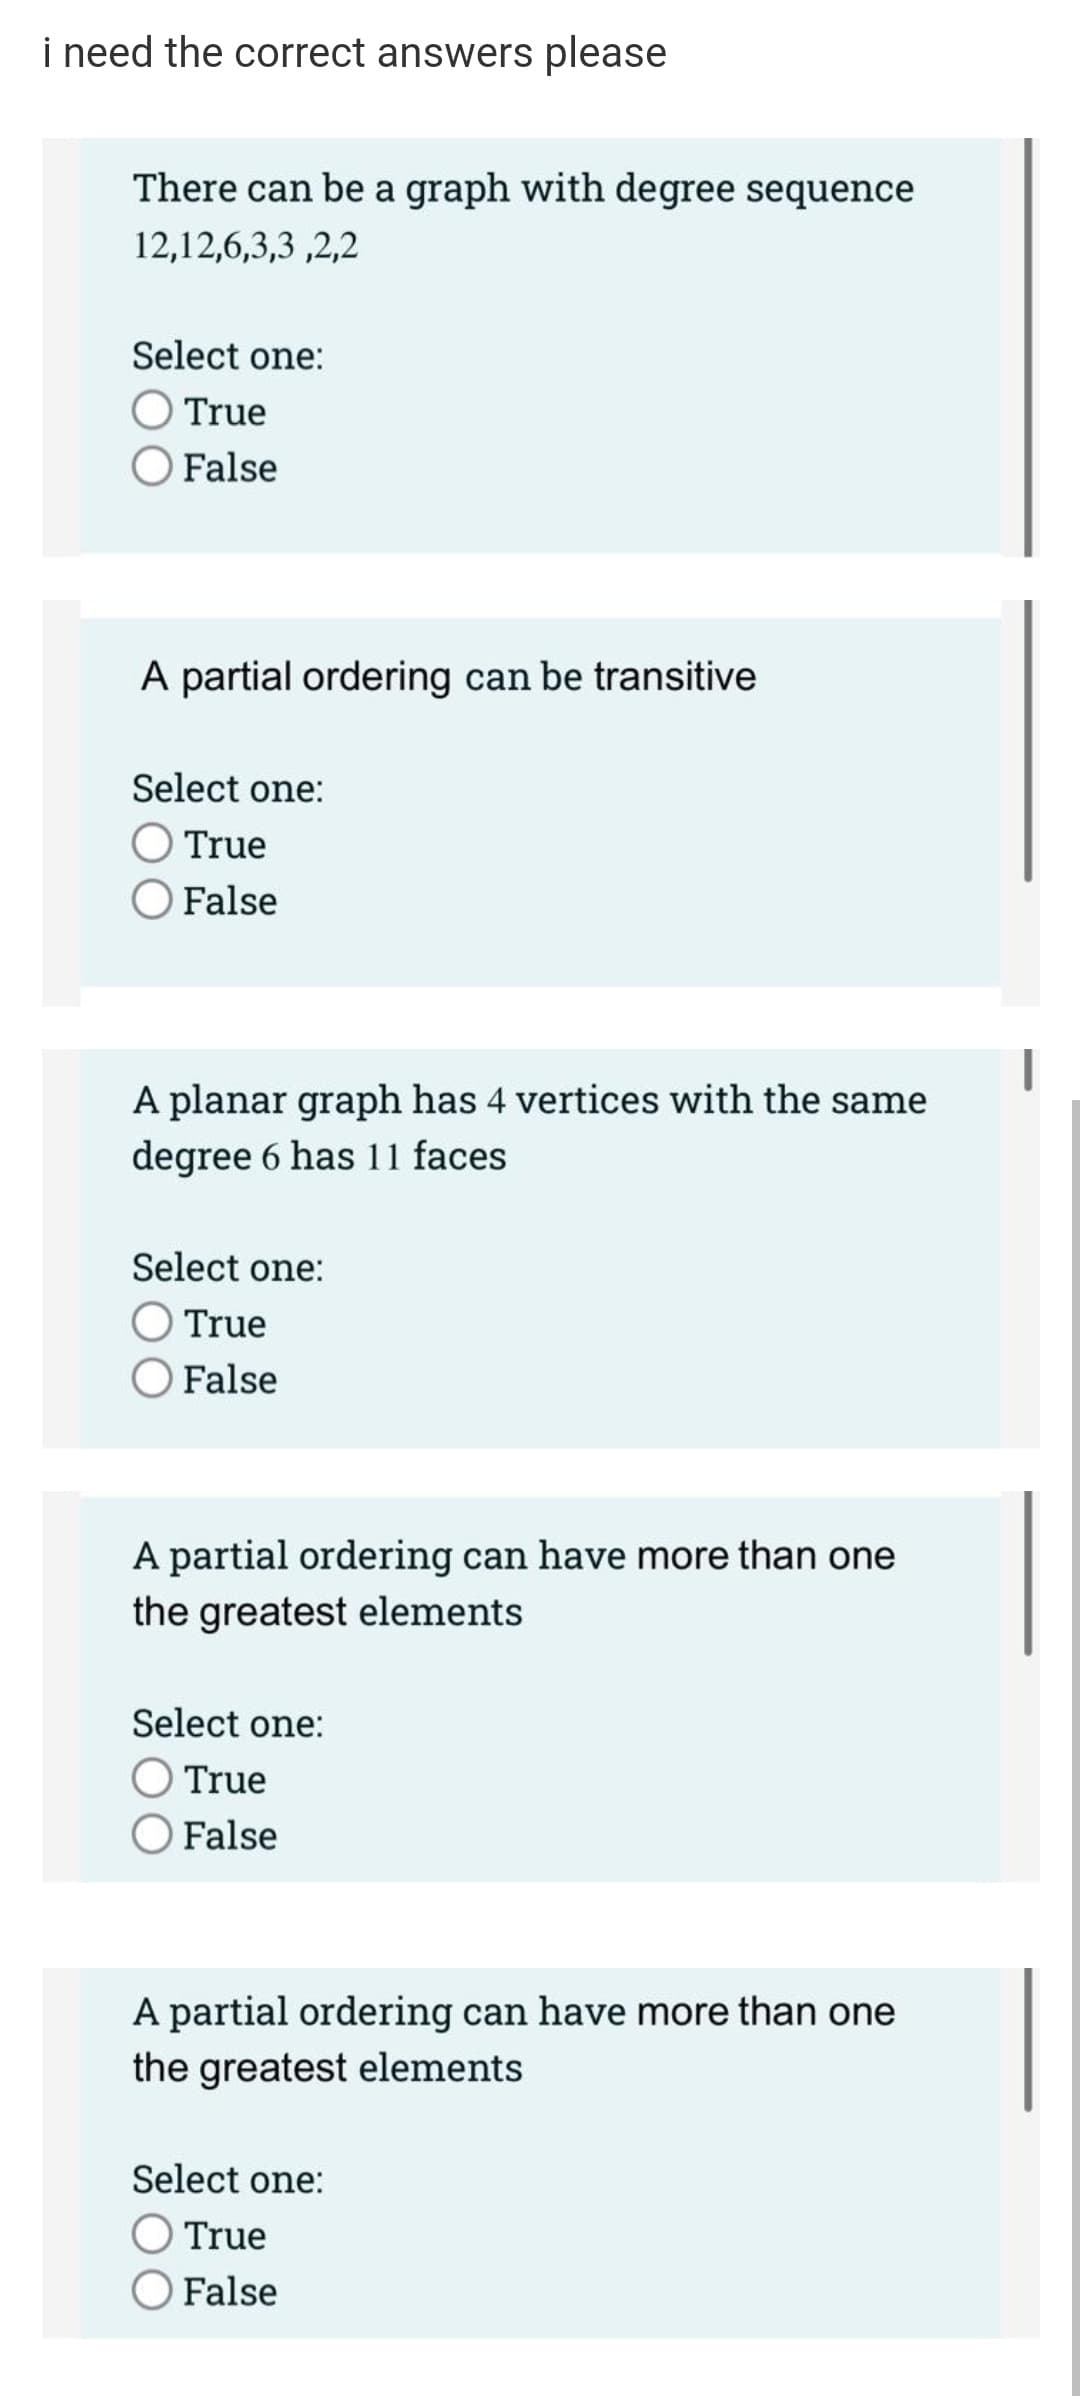 i need the correct answers please
There can be a graph with degree sequence
12,12,6,3,3 ,2,2
Select one:
O True
O False
A partial ordering can be transitive
Select one:
True
O False
A planar graph has 4 vertices with the same
degree 6 has 11 faces
Select one:
O True
O False
A partial ordering can have more than one
the greatest elements
Select one:
OTrue
OFalse
A partial ordering can have more than one
the greatest elements
Select one:
O True
O False
